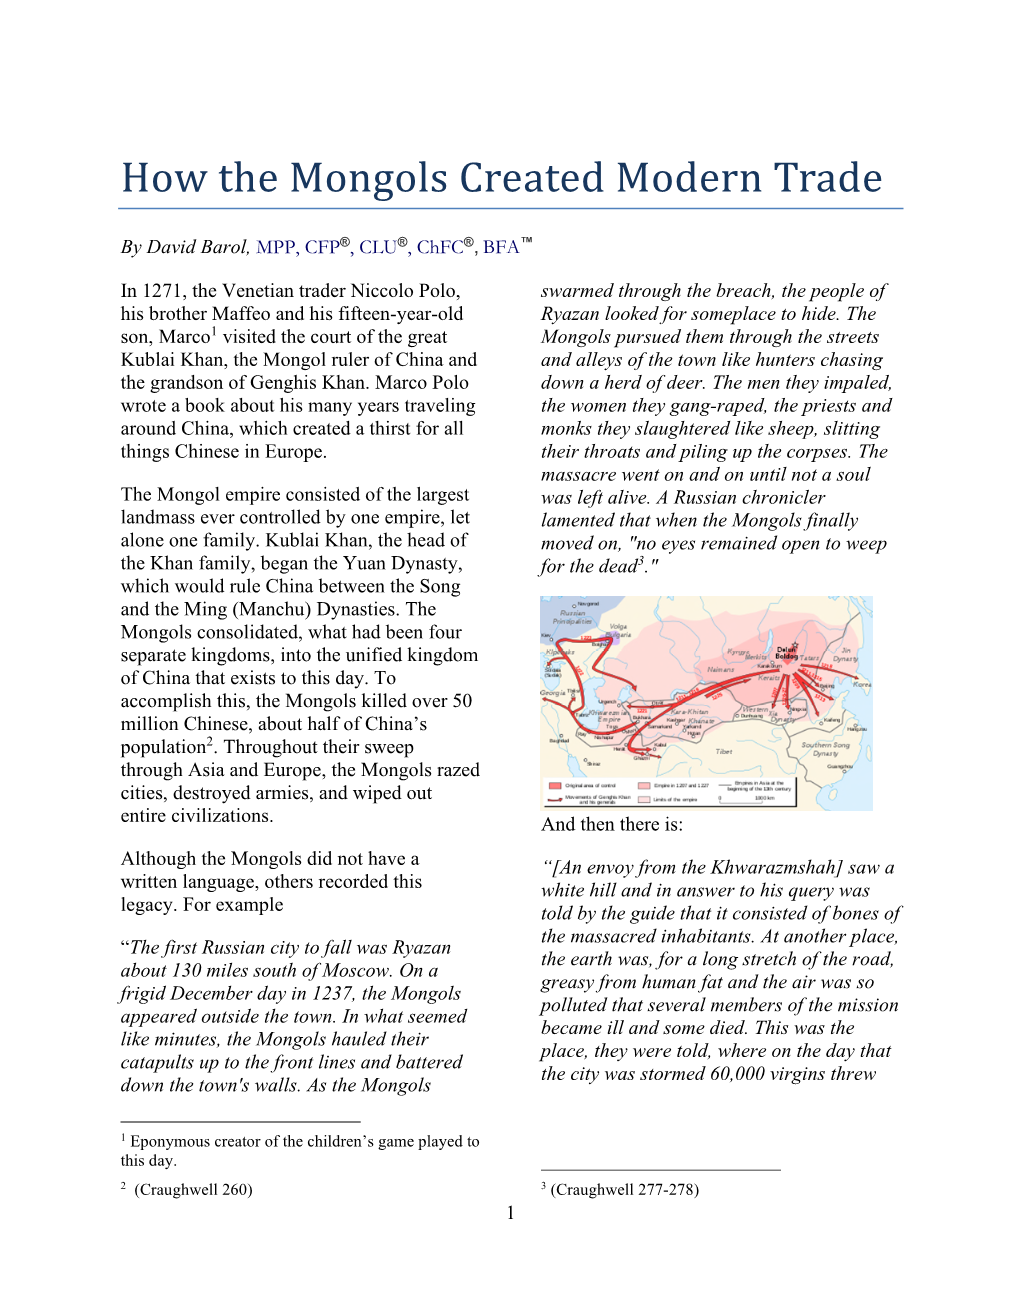 How the Mongols Created Modern Trade